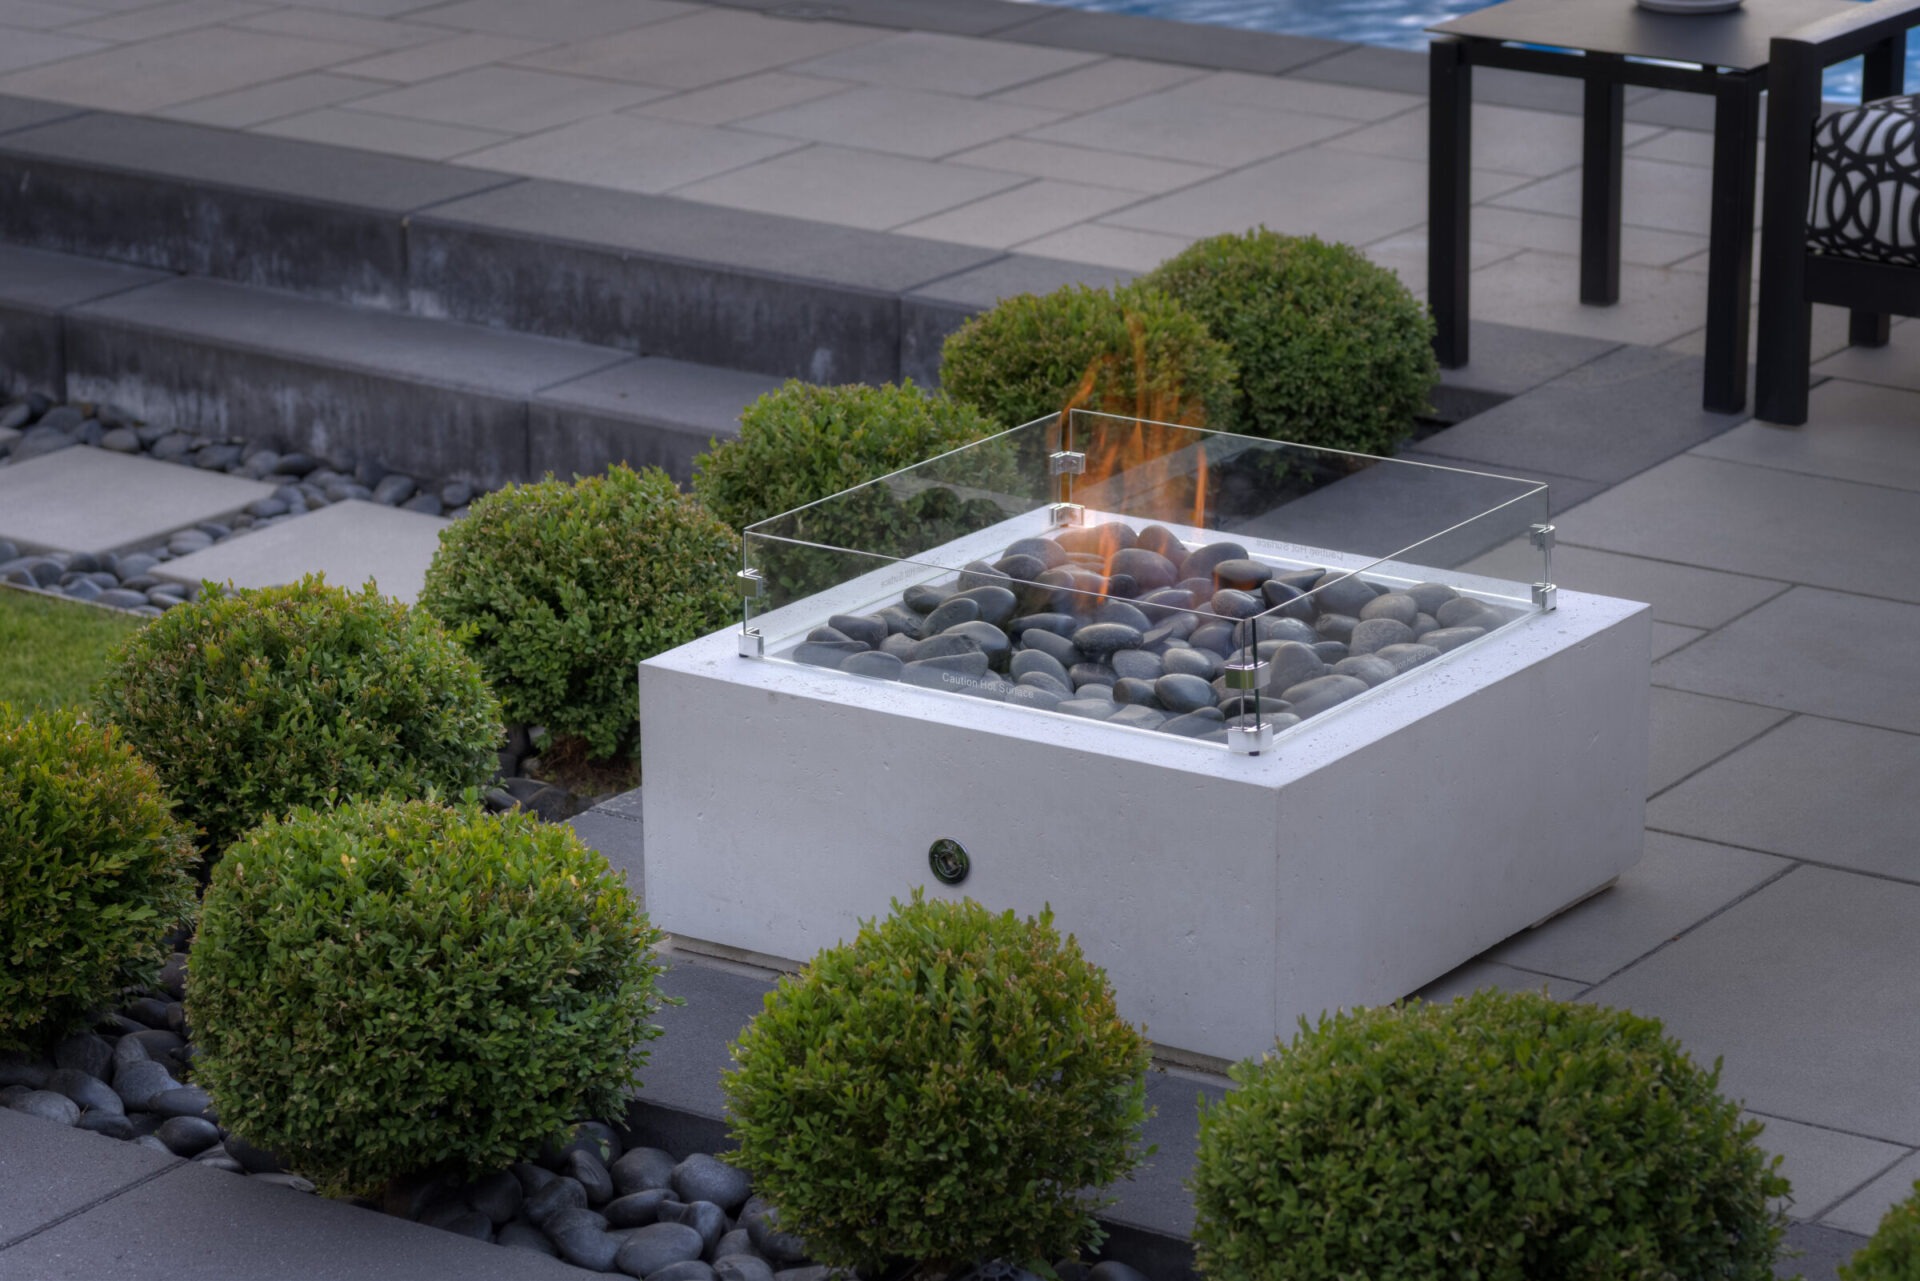 An outdoor gas fire pit with glass wind guard on a patio, surrounded by neatly trimmed green shrubs and smooth grey stones.